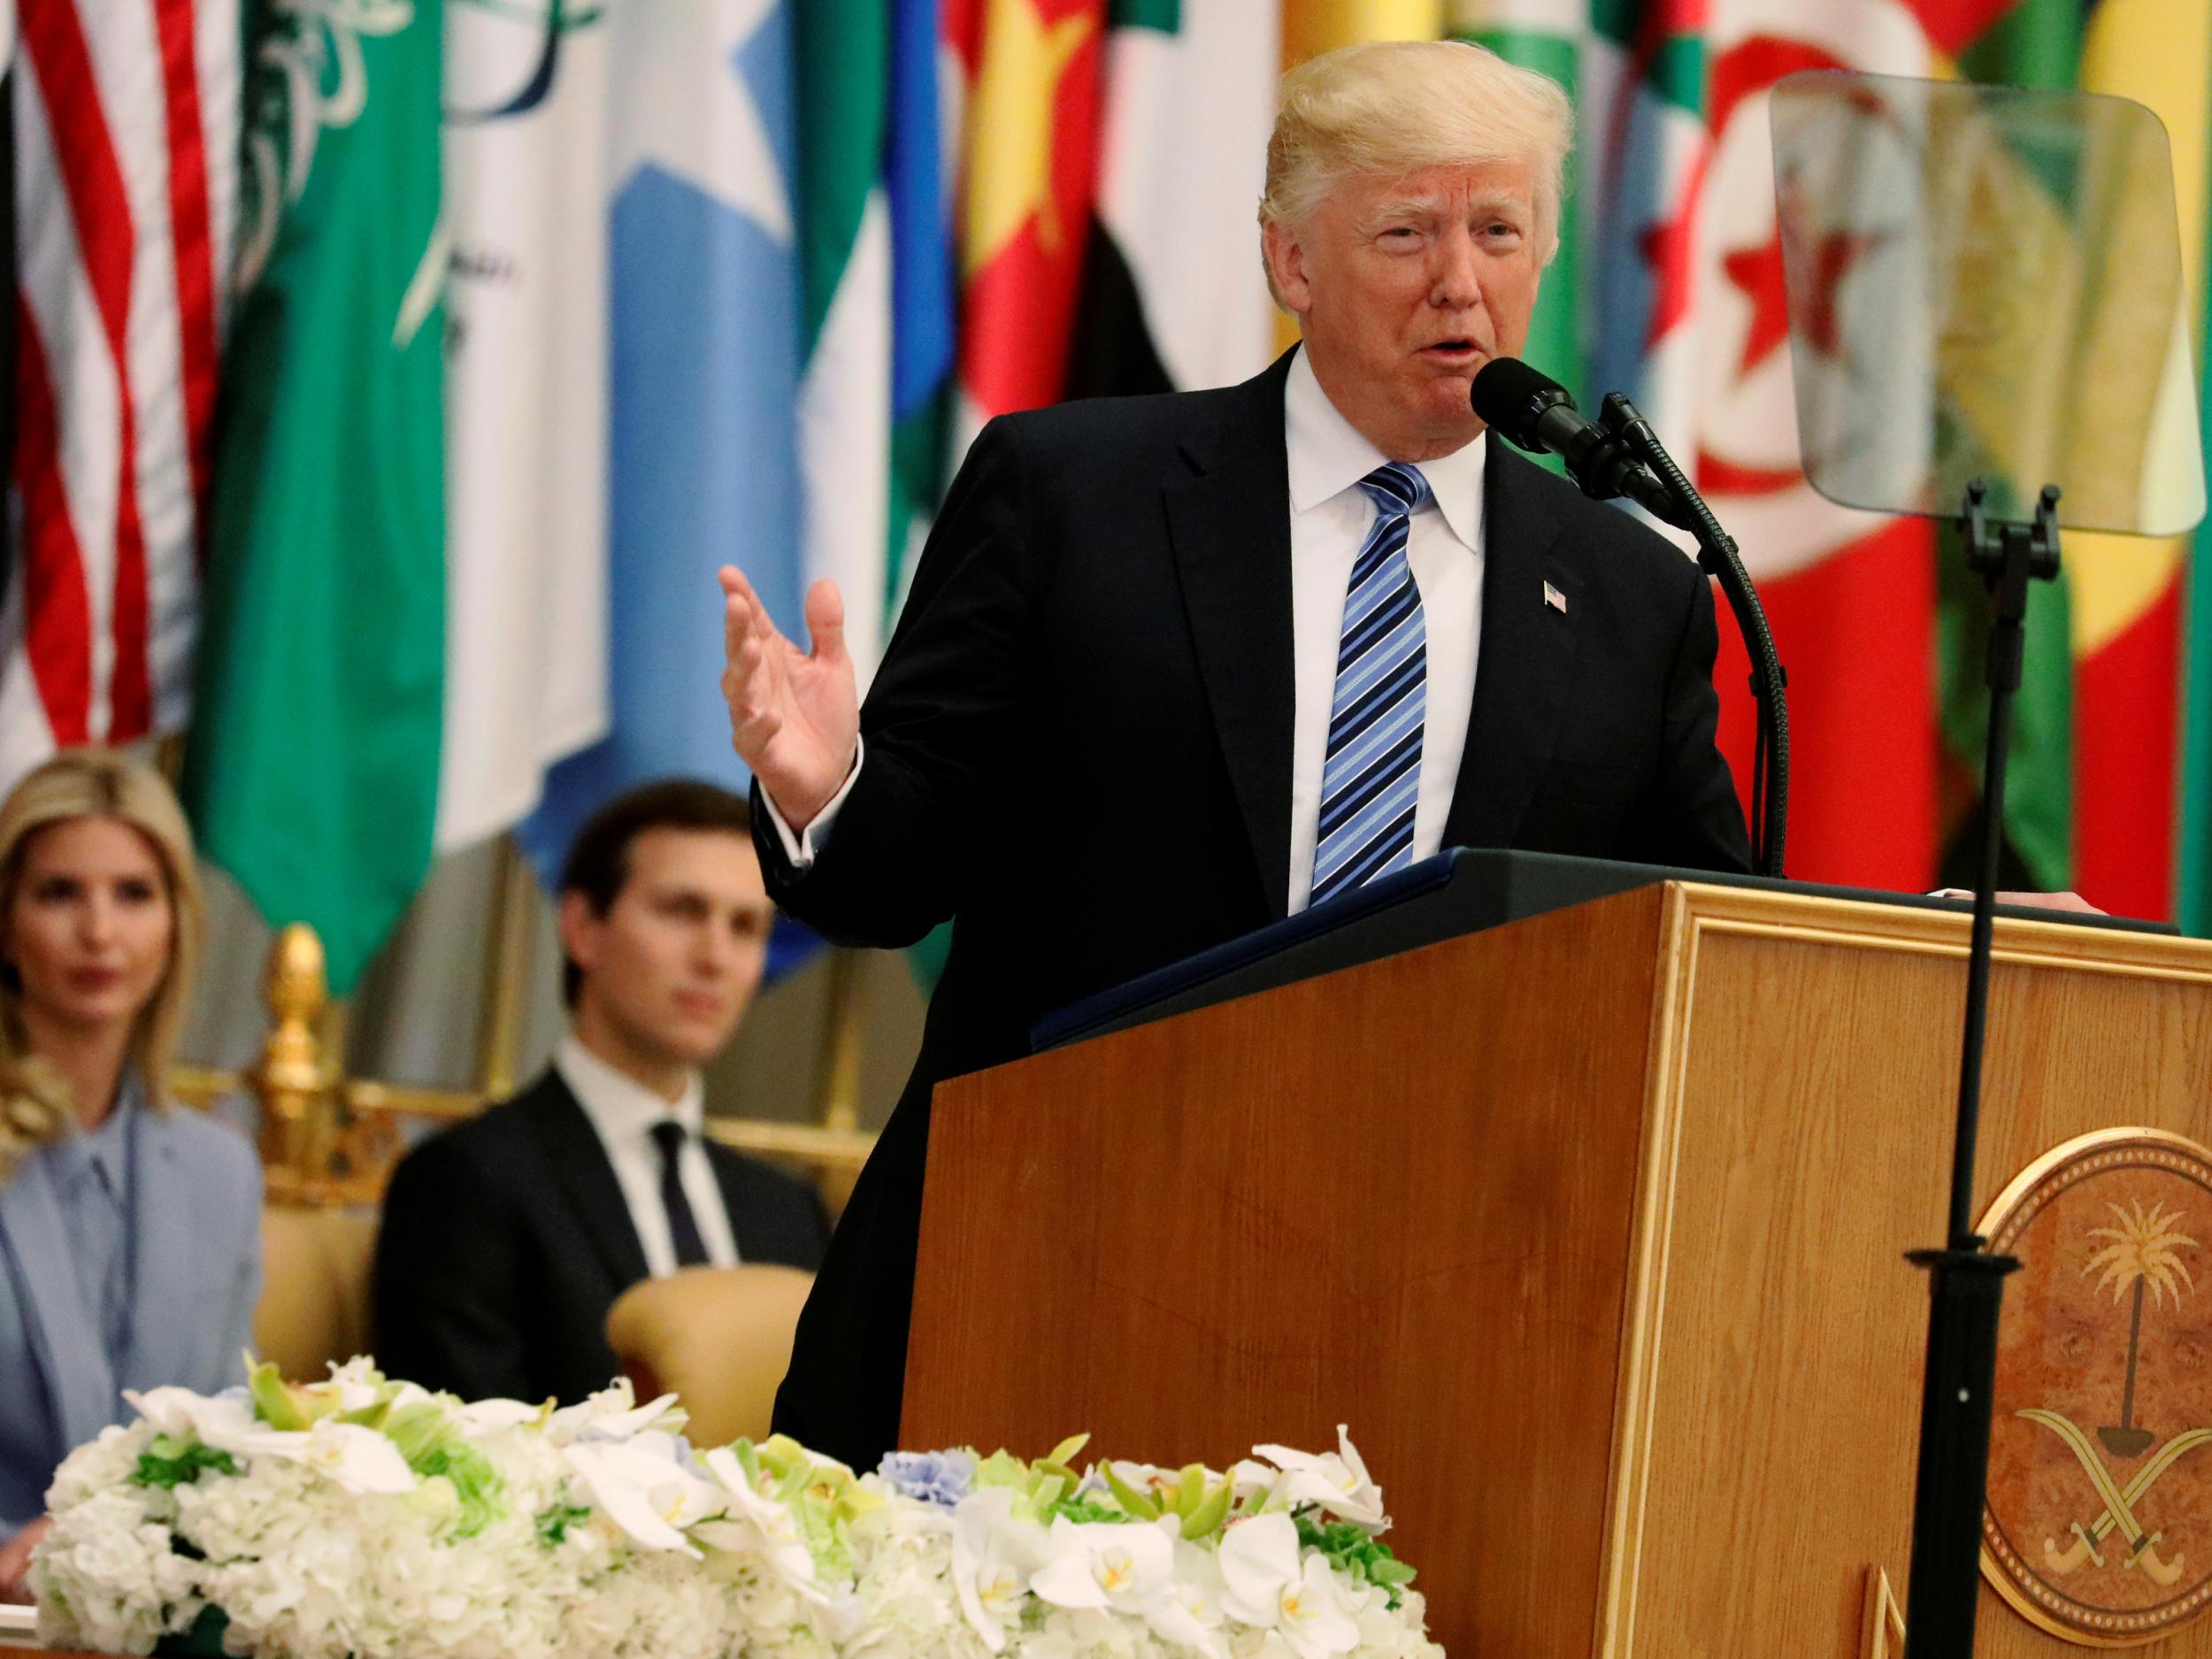 US President Donald Trump, flanked by Ivanka Trump and White House senior adviser Jared Kushner, delivers remarks to the Arab Islamic American Summit in Riyadh, Saudi Arabia, on 21 May 2017